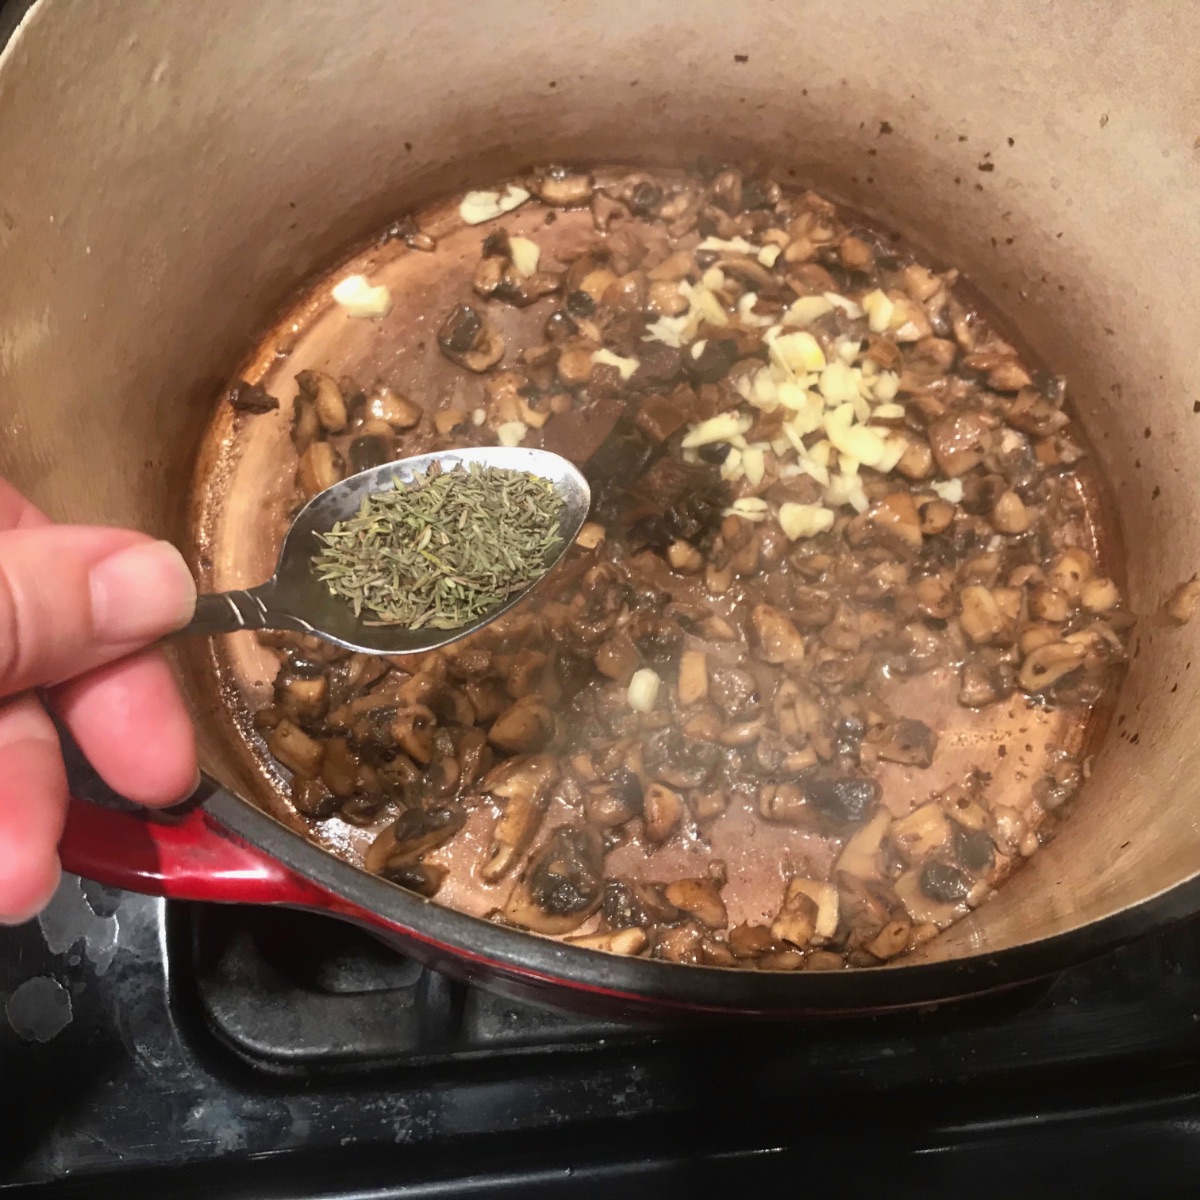 Adding thyme and garlic to the mushrooms in the pot.